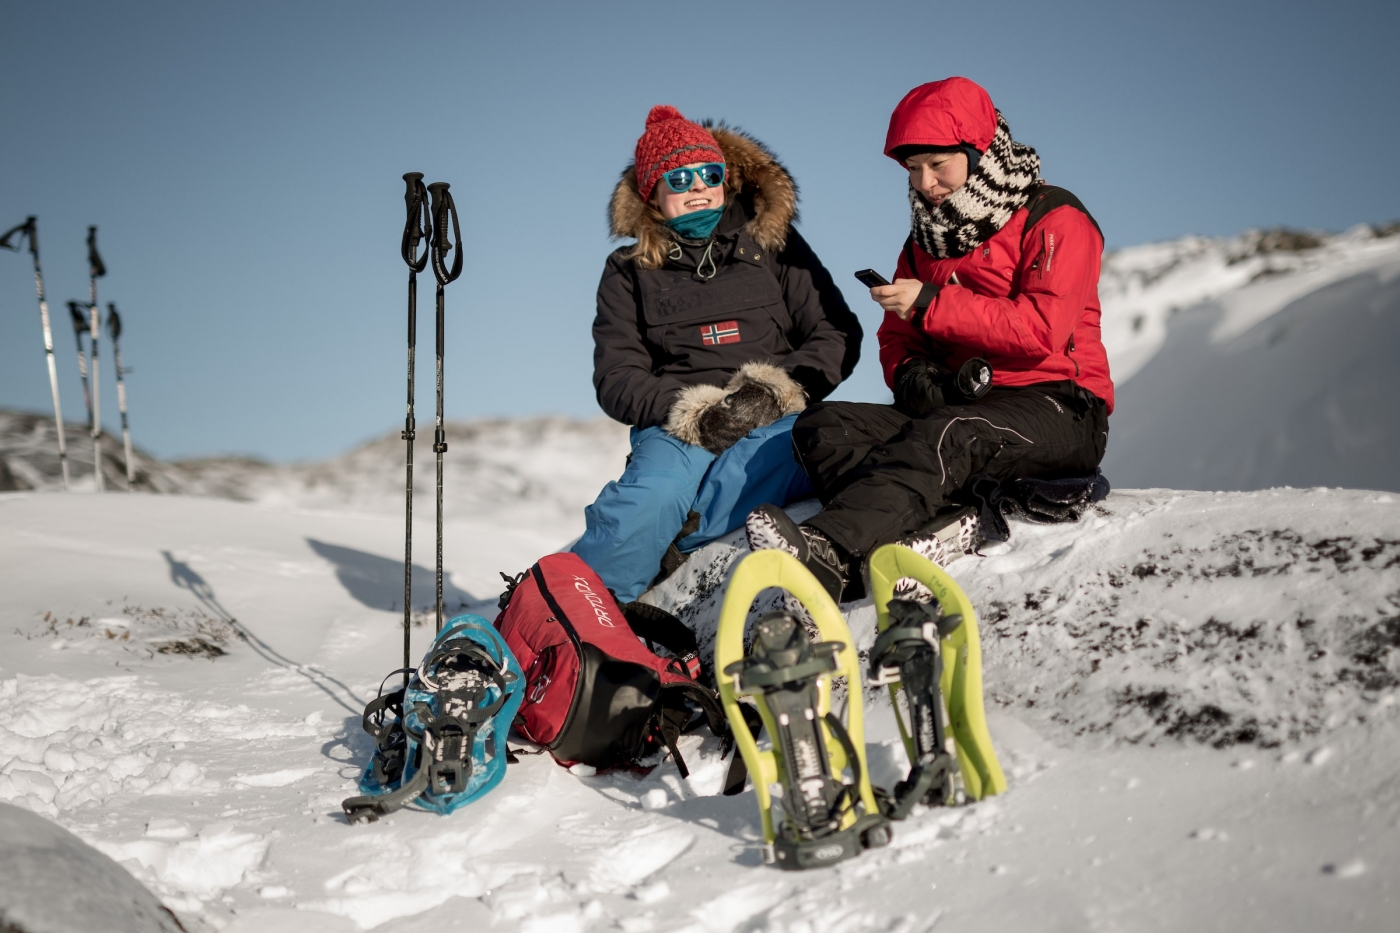 Two snowshoers taking a break to update their lives on social media near Iluissat in Greenland. Photo by Mads Pihl - Visit Greenland